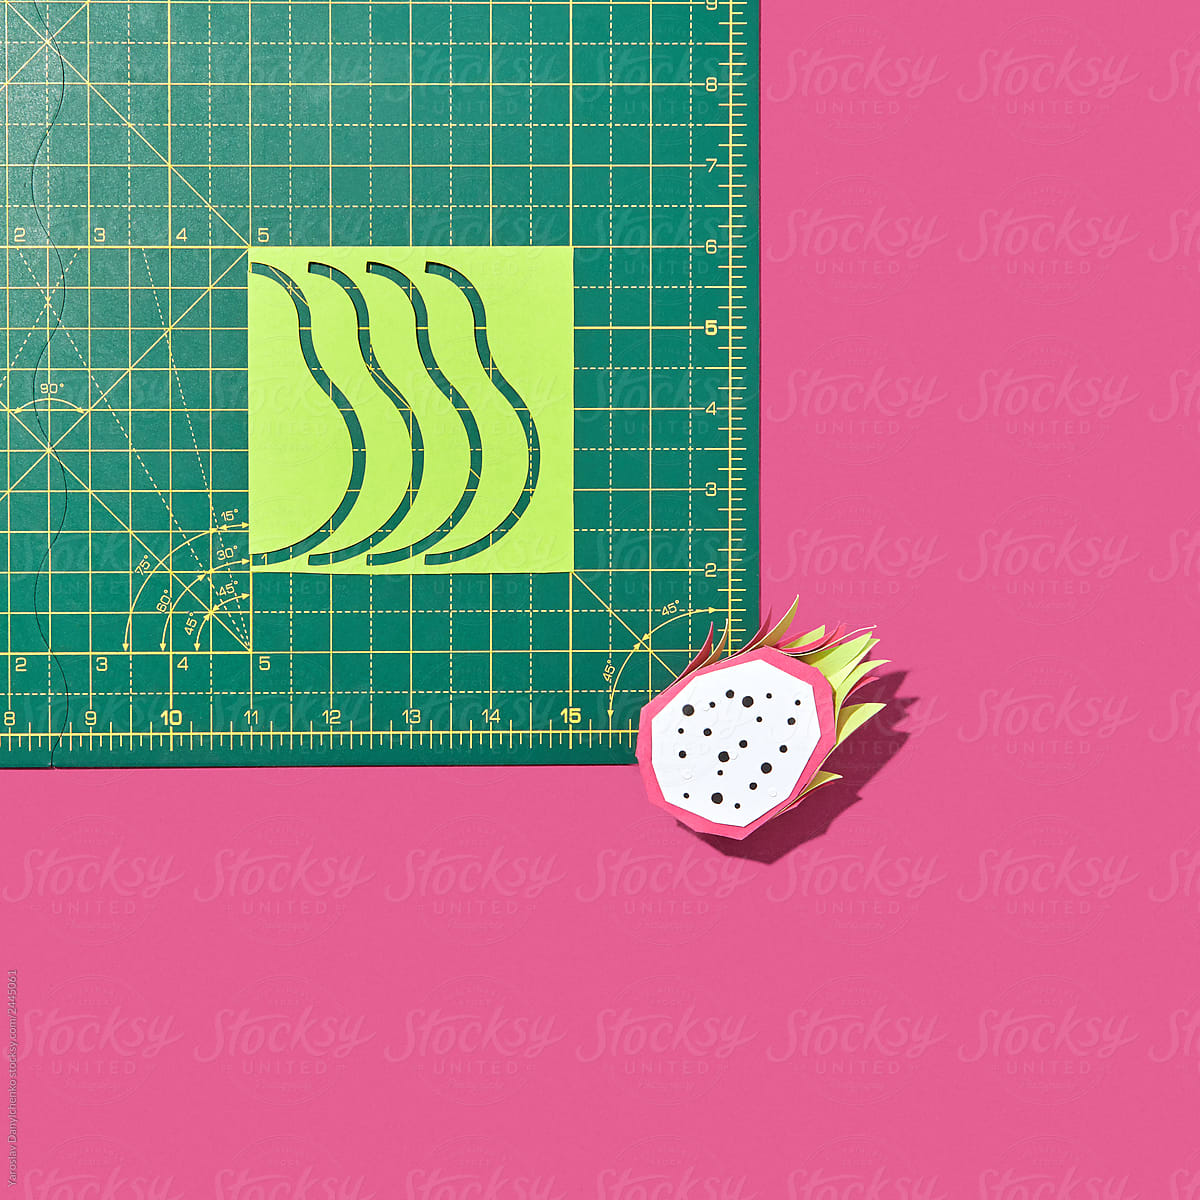 Handmade paper origami of dragon fruit and mathematical tables on a pink background.